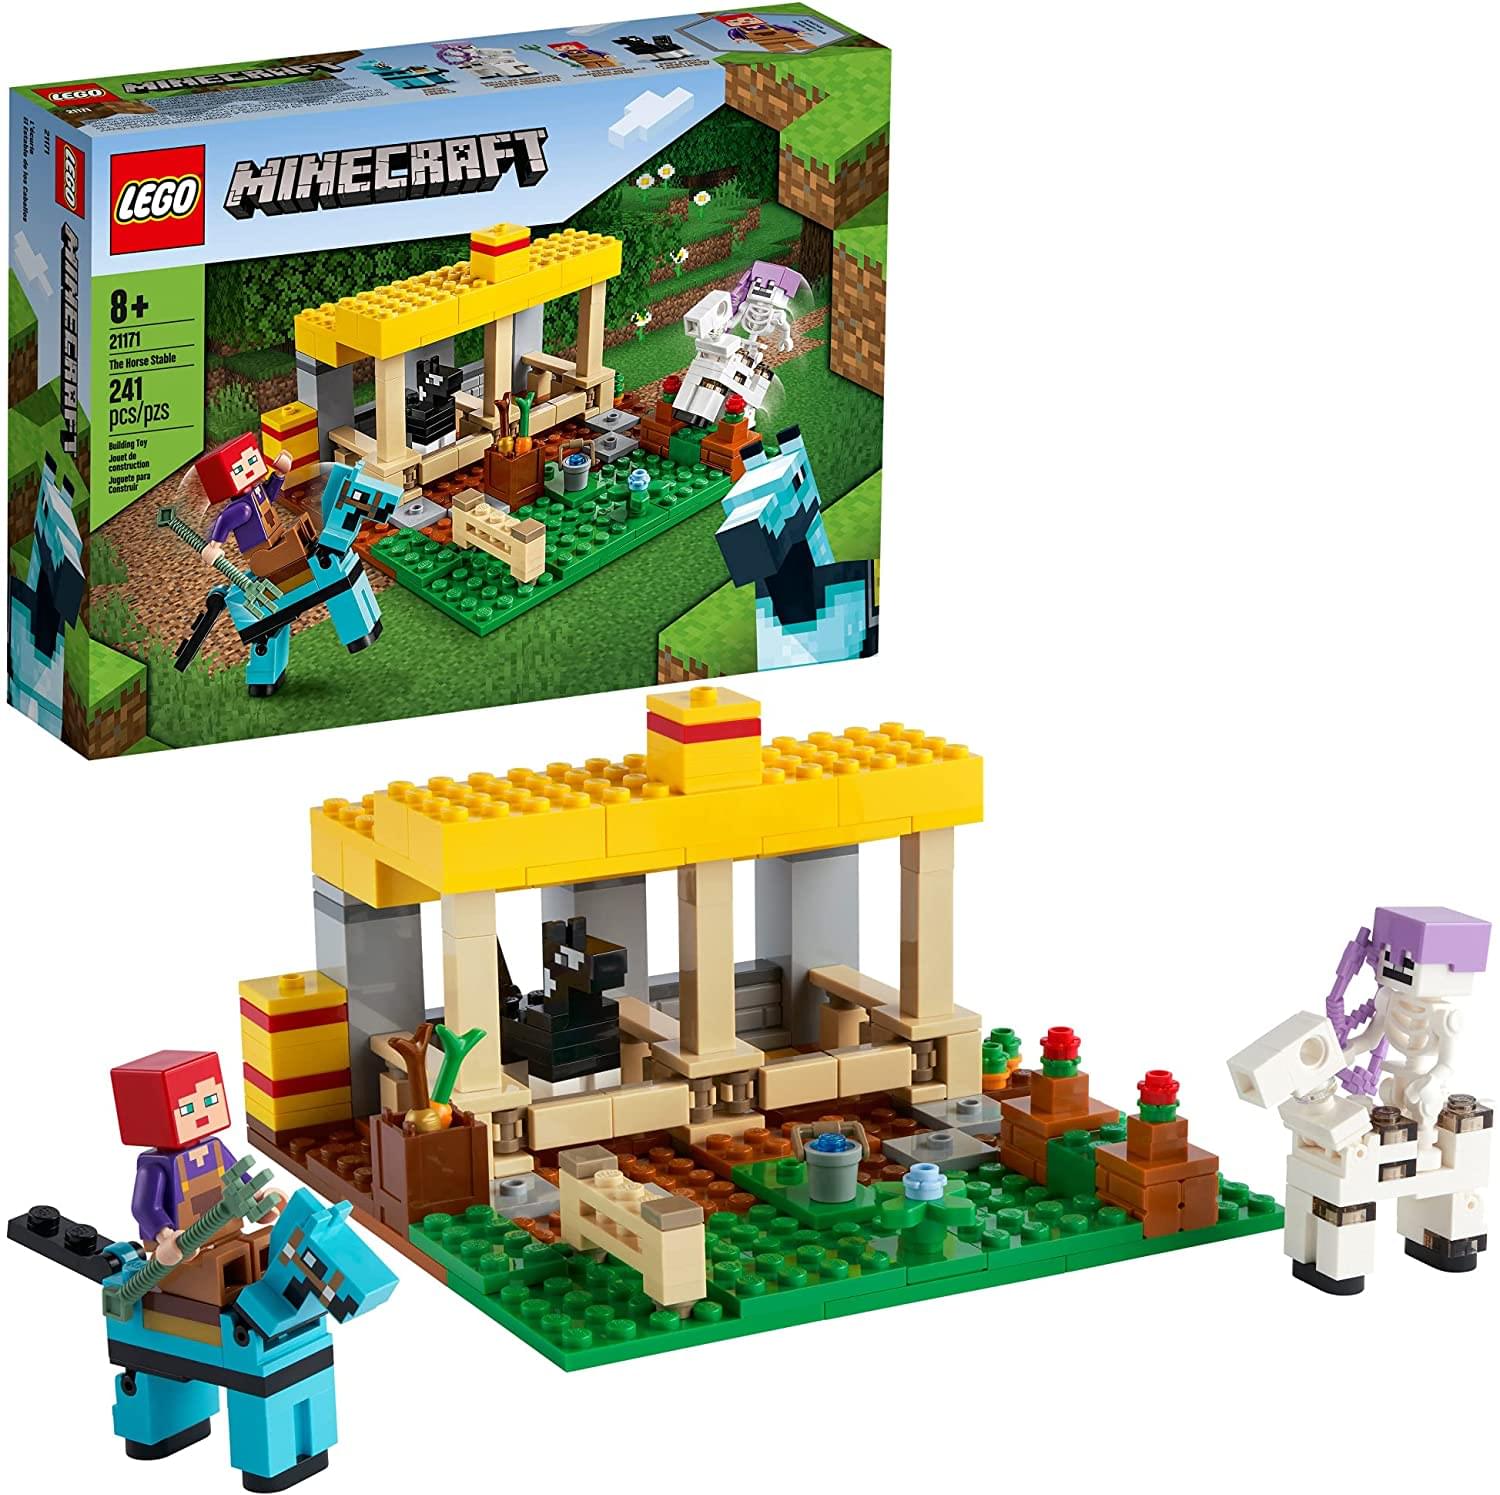 LEGO Minecraft 21171 The Horse Stable 241 Piece Building Kit